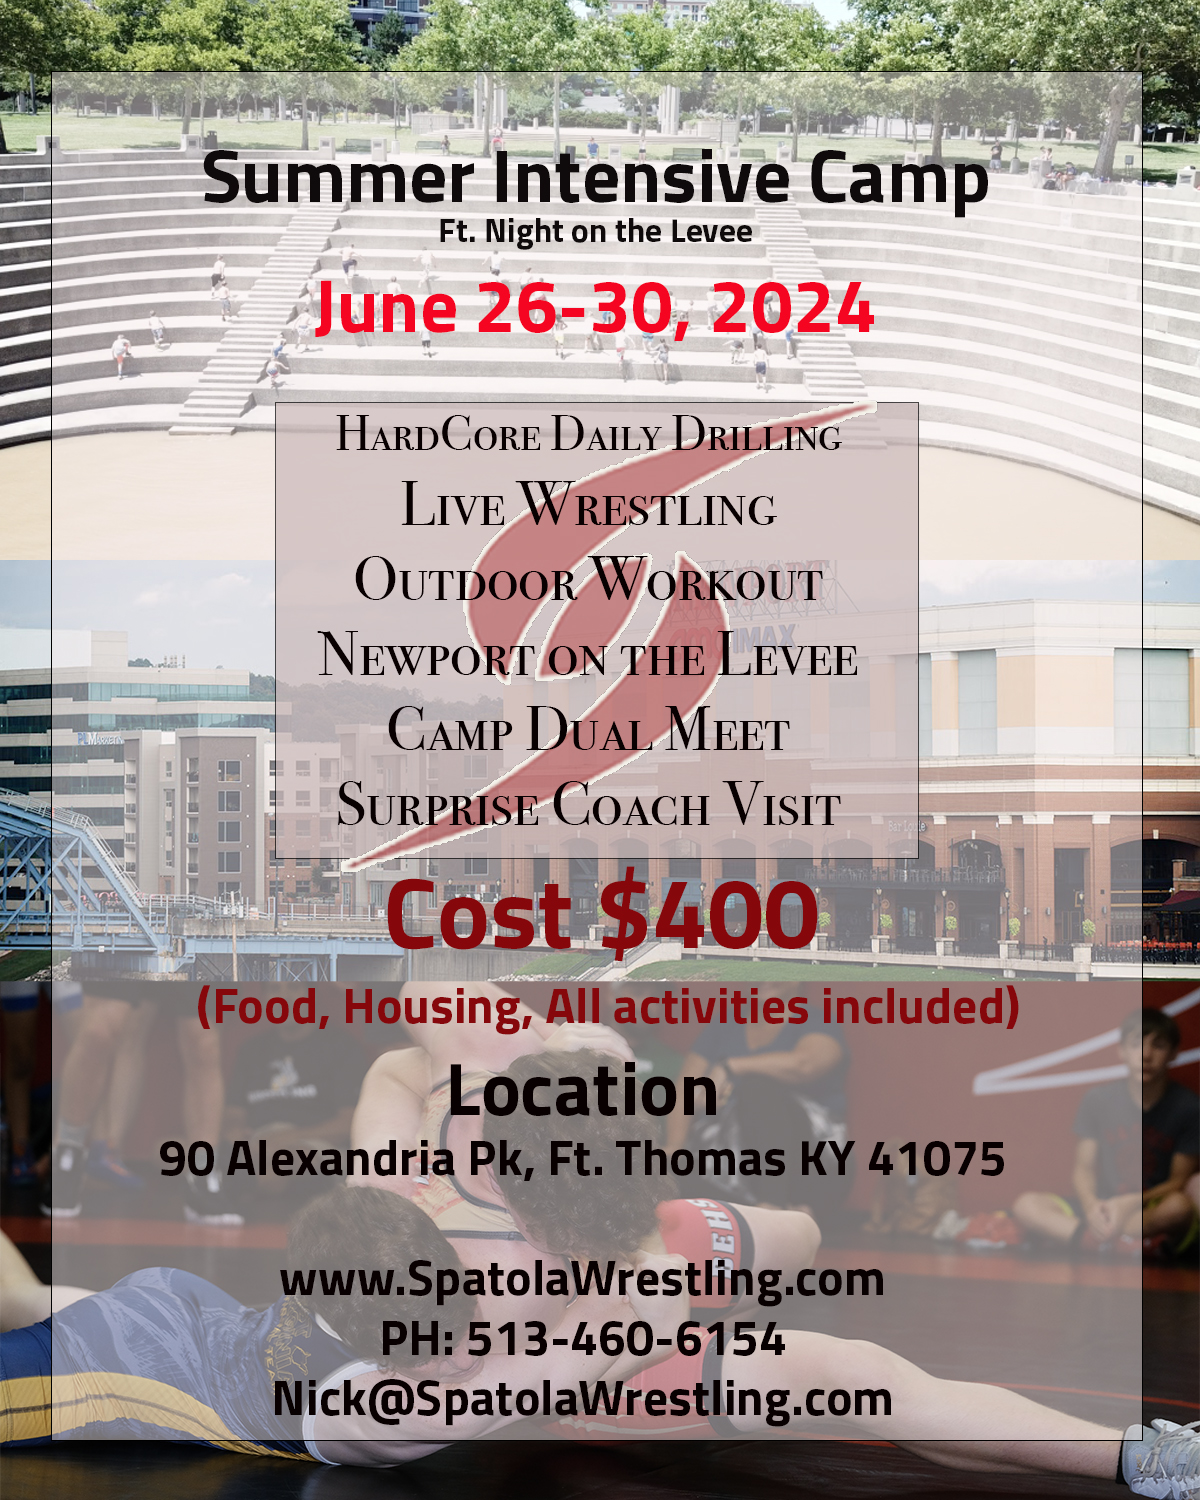 Spatola Wrestling Summer Camps Camps and Clinics IndianaMat